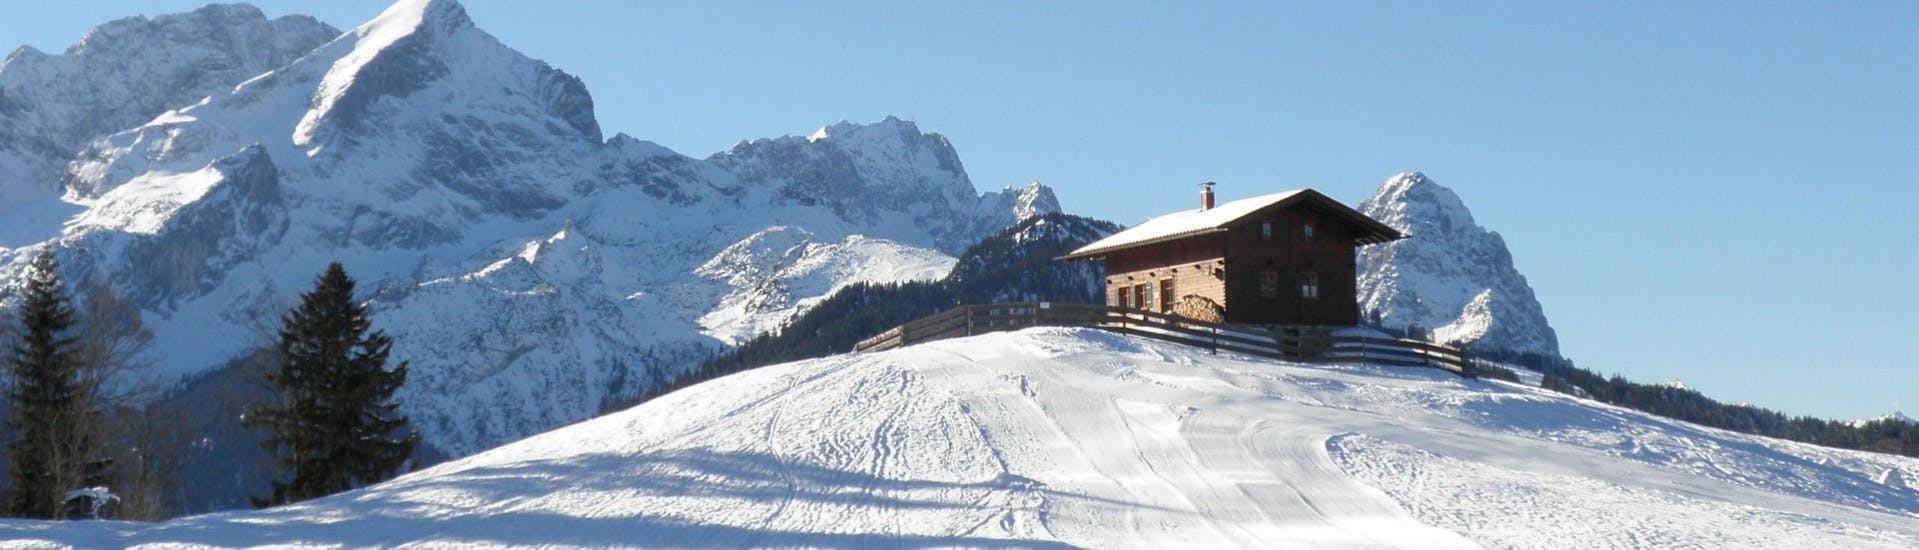 A small hut is perched on top of a ski slope in the Ski Resort of Garmisch-Classic, where the ski school Schneesportschule Morgenstern carries out its ski lessons.